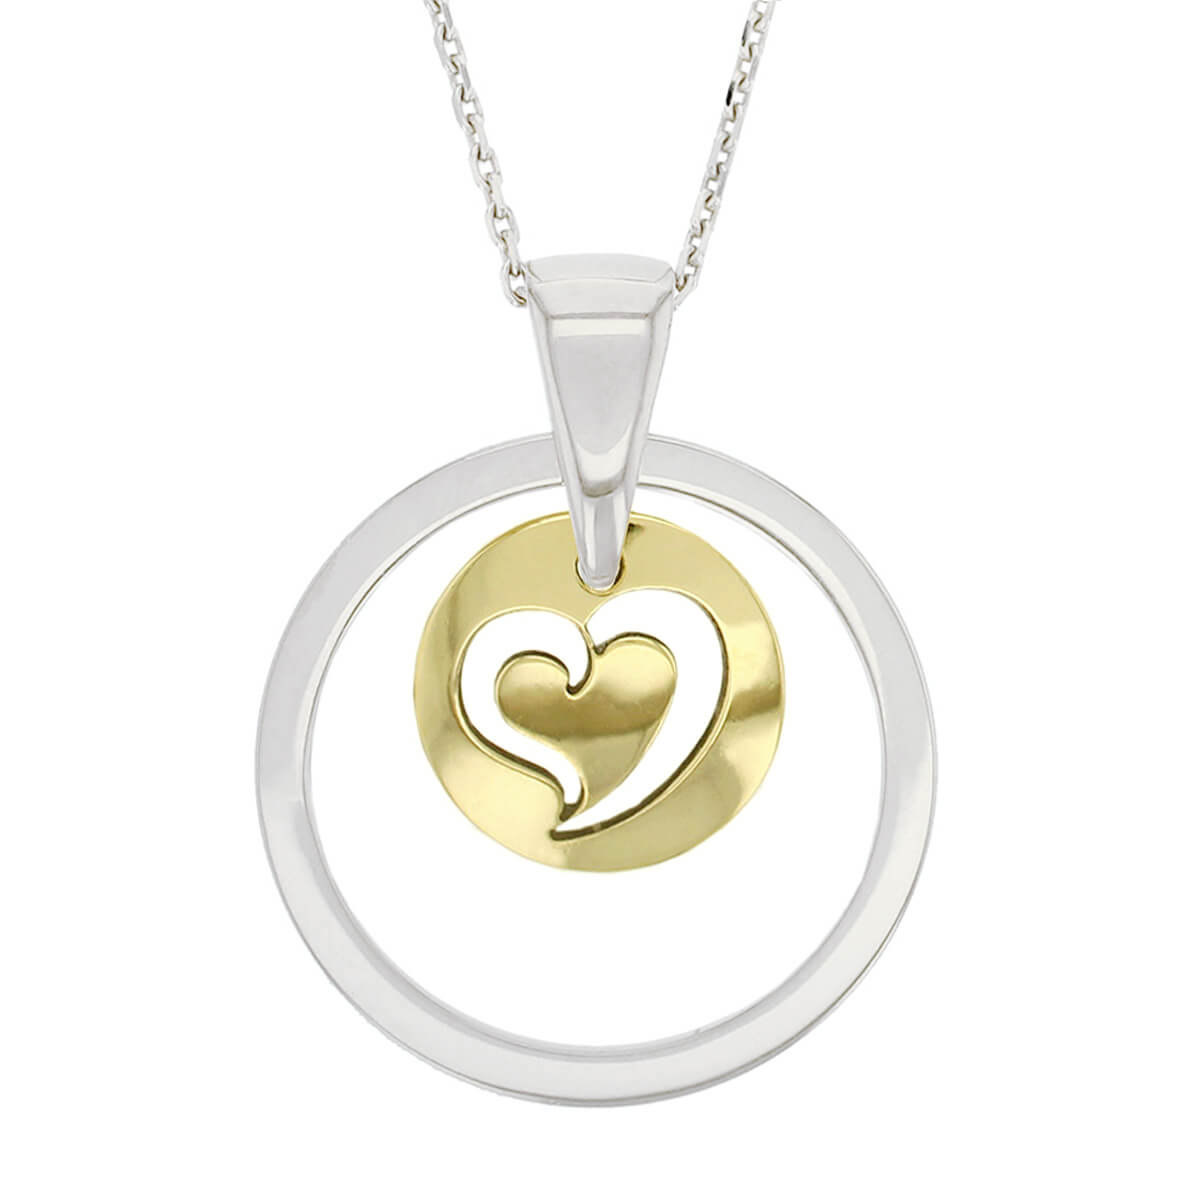 Faller Kryptos necklace, message pendant, personalised engraving, make your own, jewellery, gift, celebration, symbol, 18ct yellow gold disc, heart